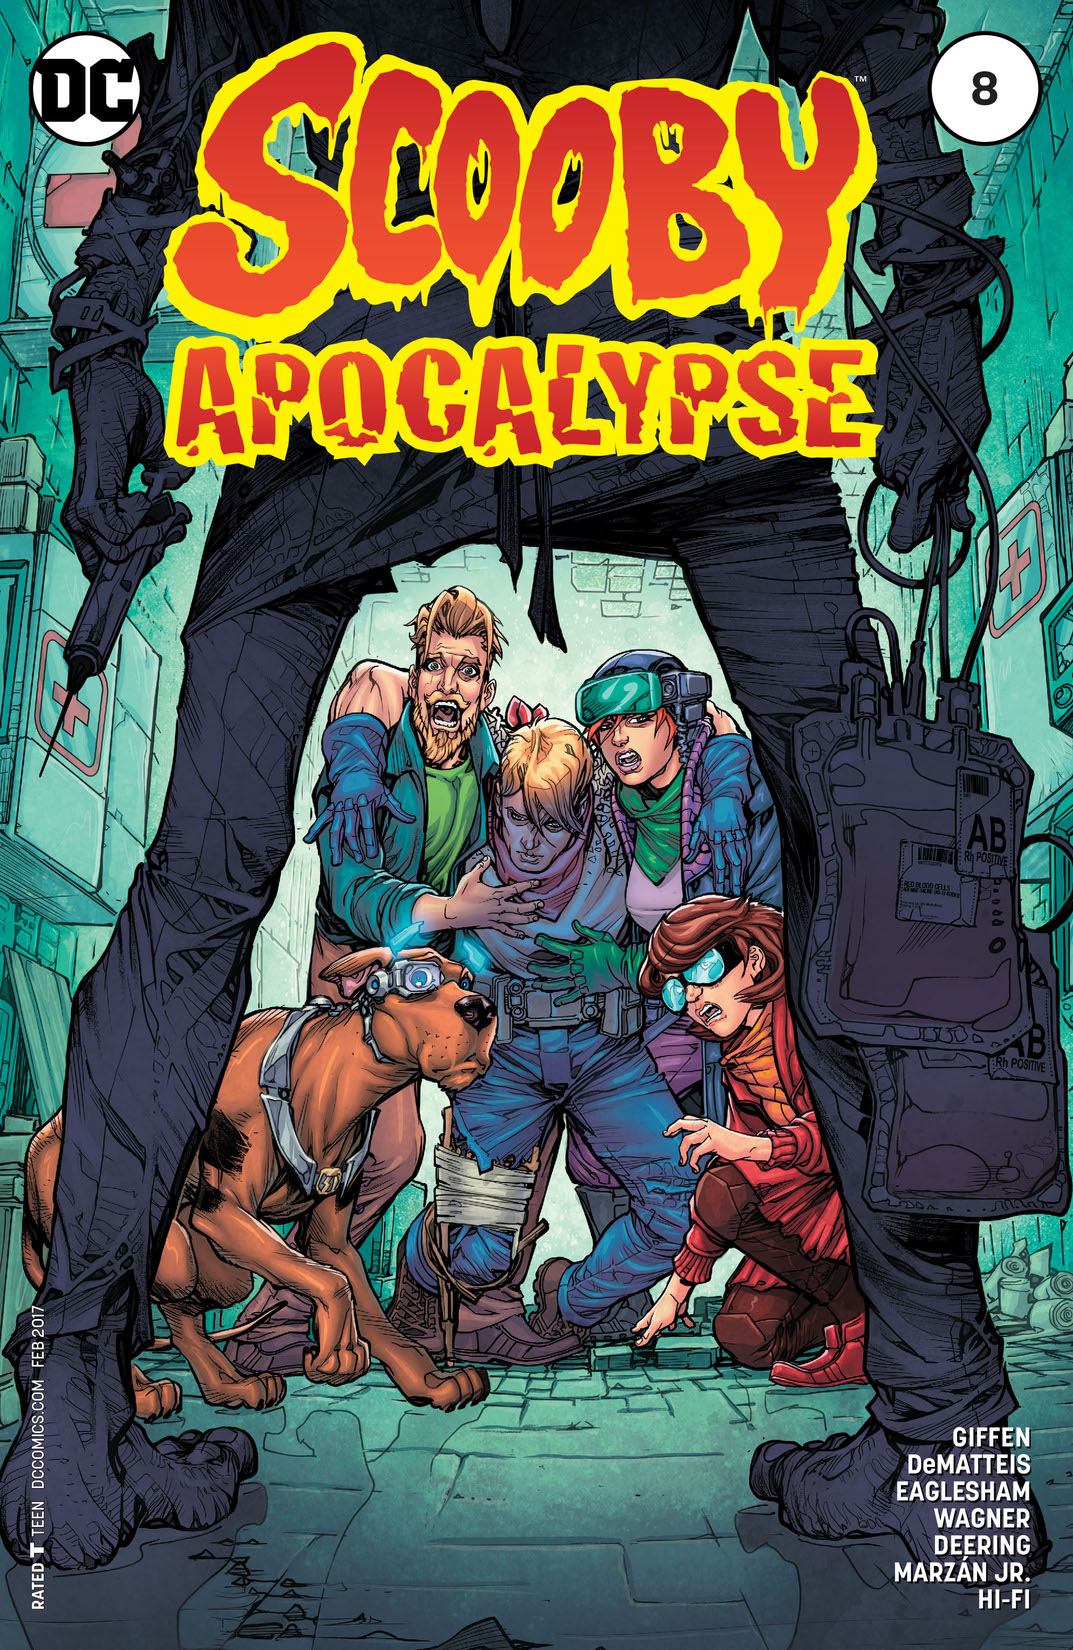 Scooby Apocalypse #8 preview images